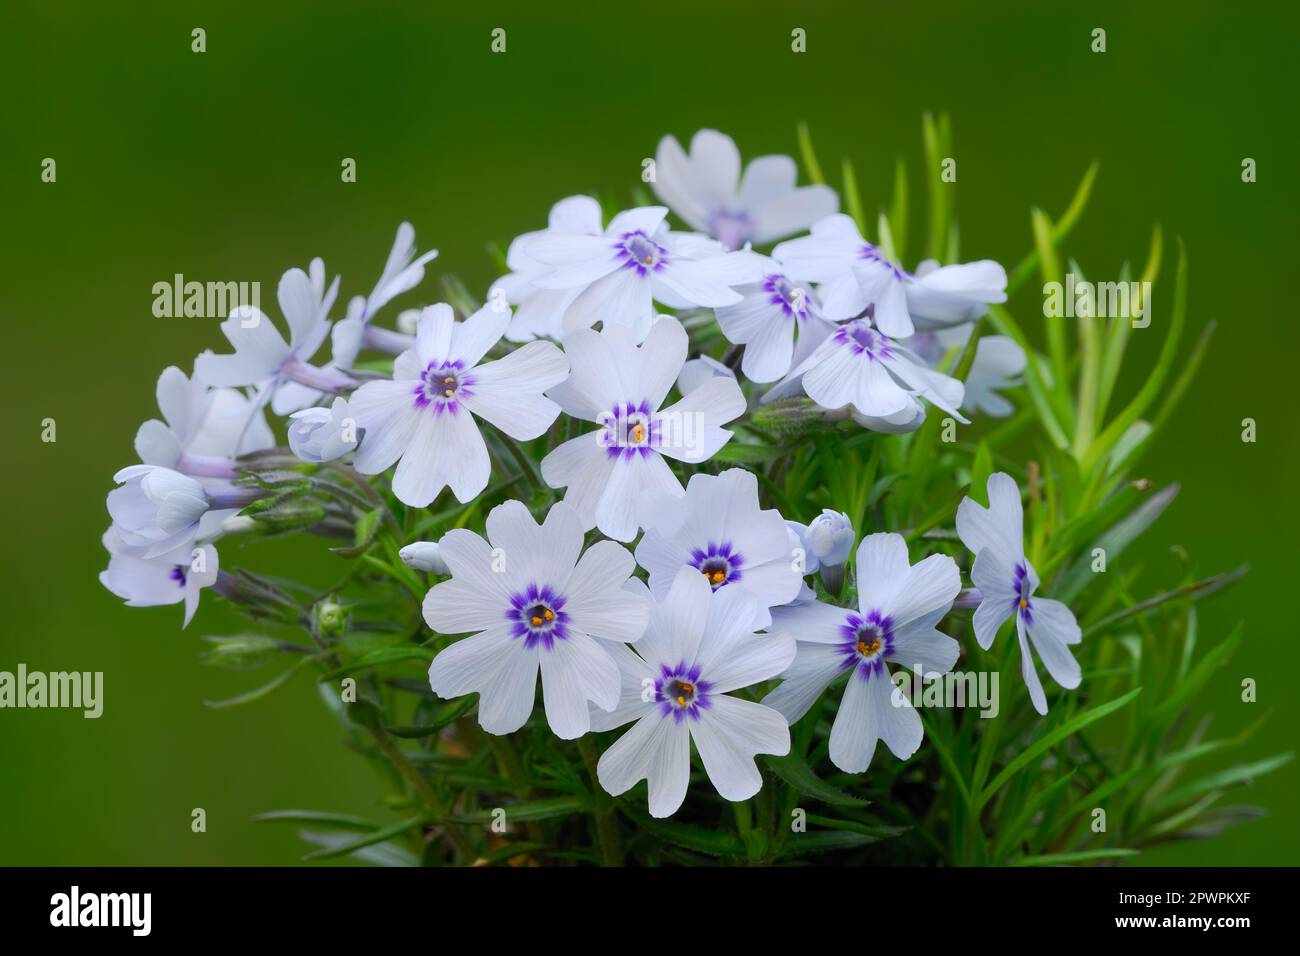 Moss or creeping phlox subulata Bavaria flowers in the garden, closeup.White flowering plant evergreen perennial. Blurred  green background. Trencin, Stock Photo